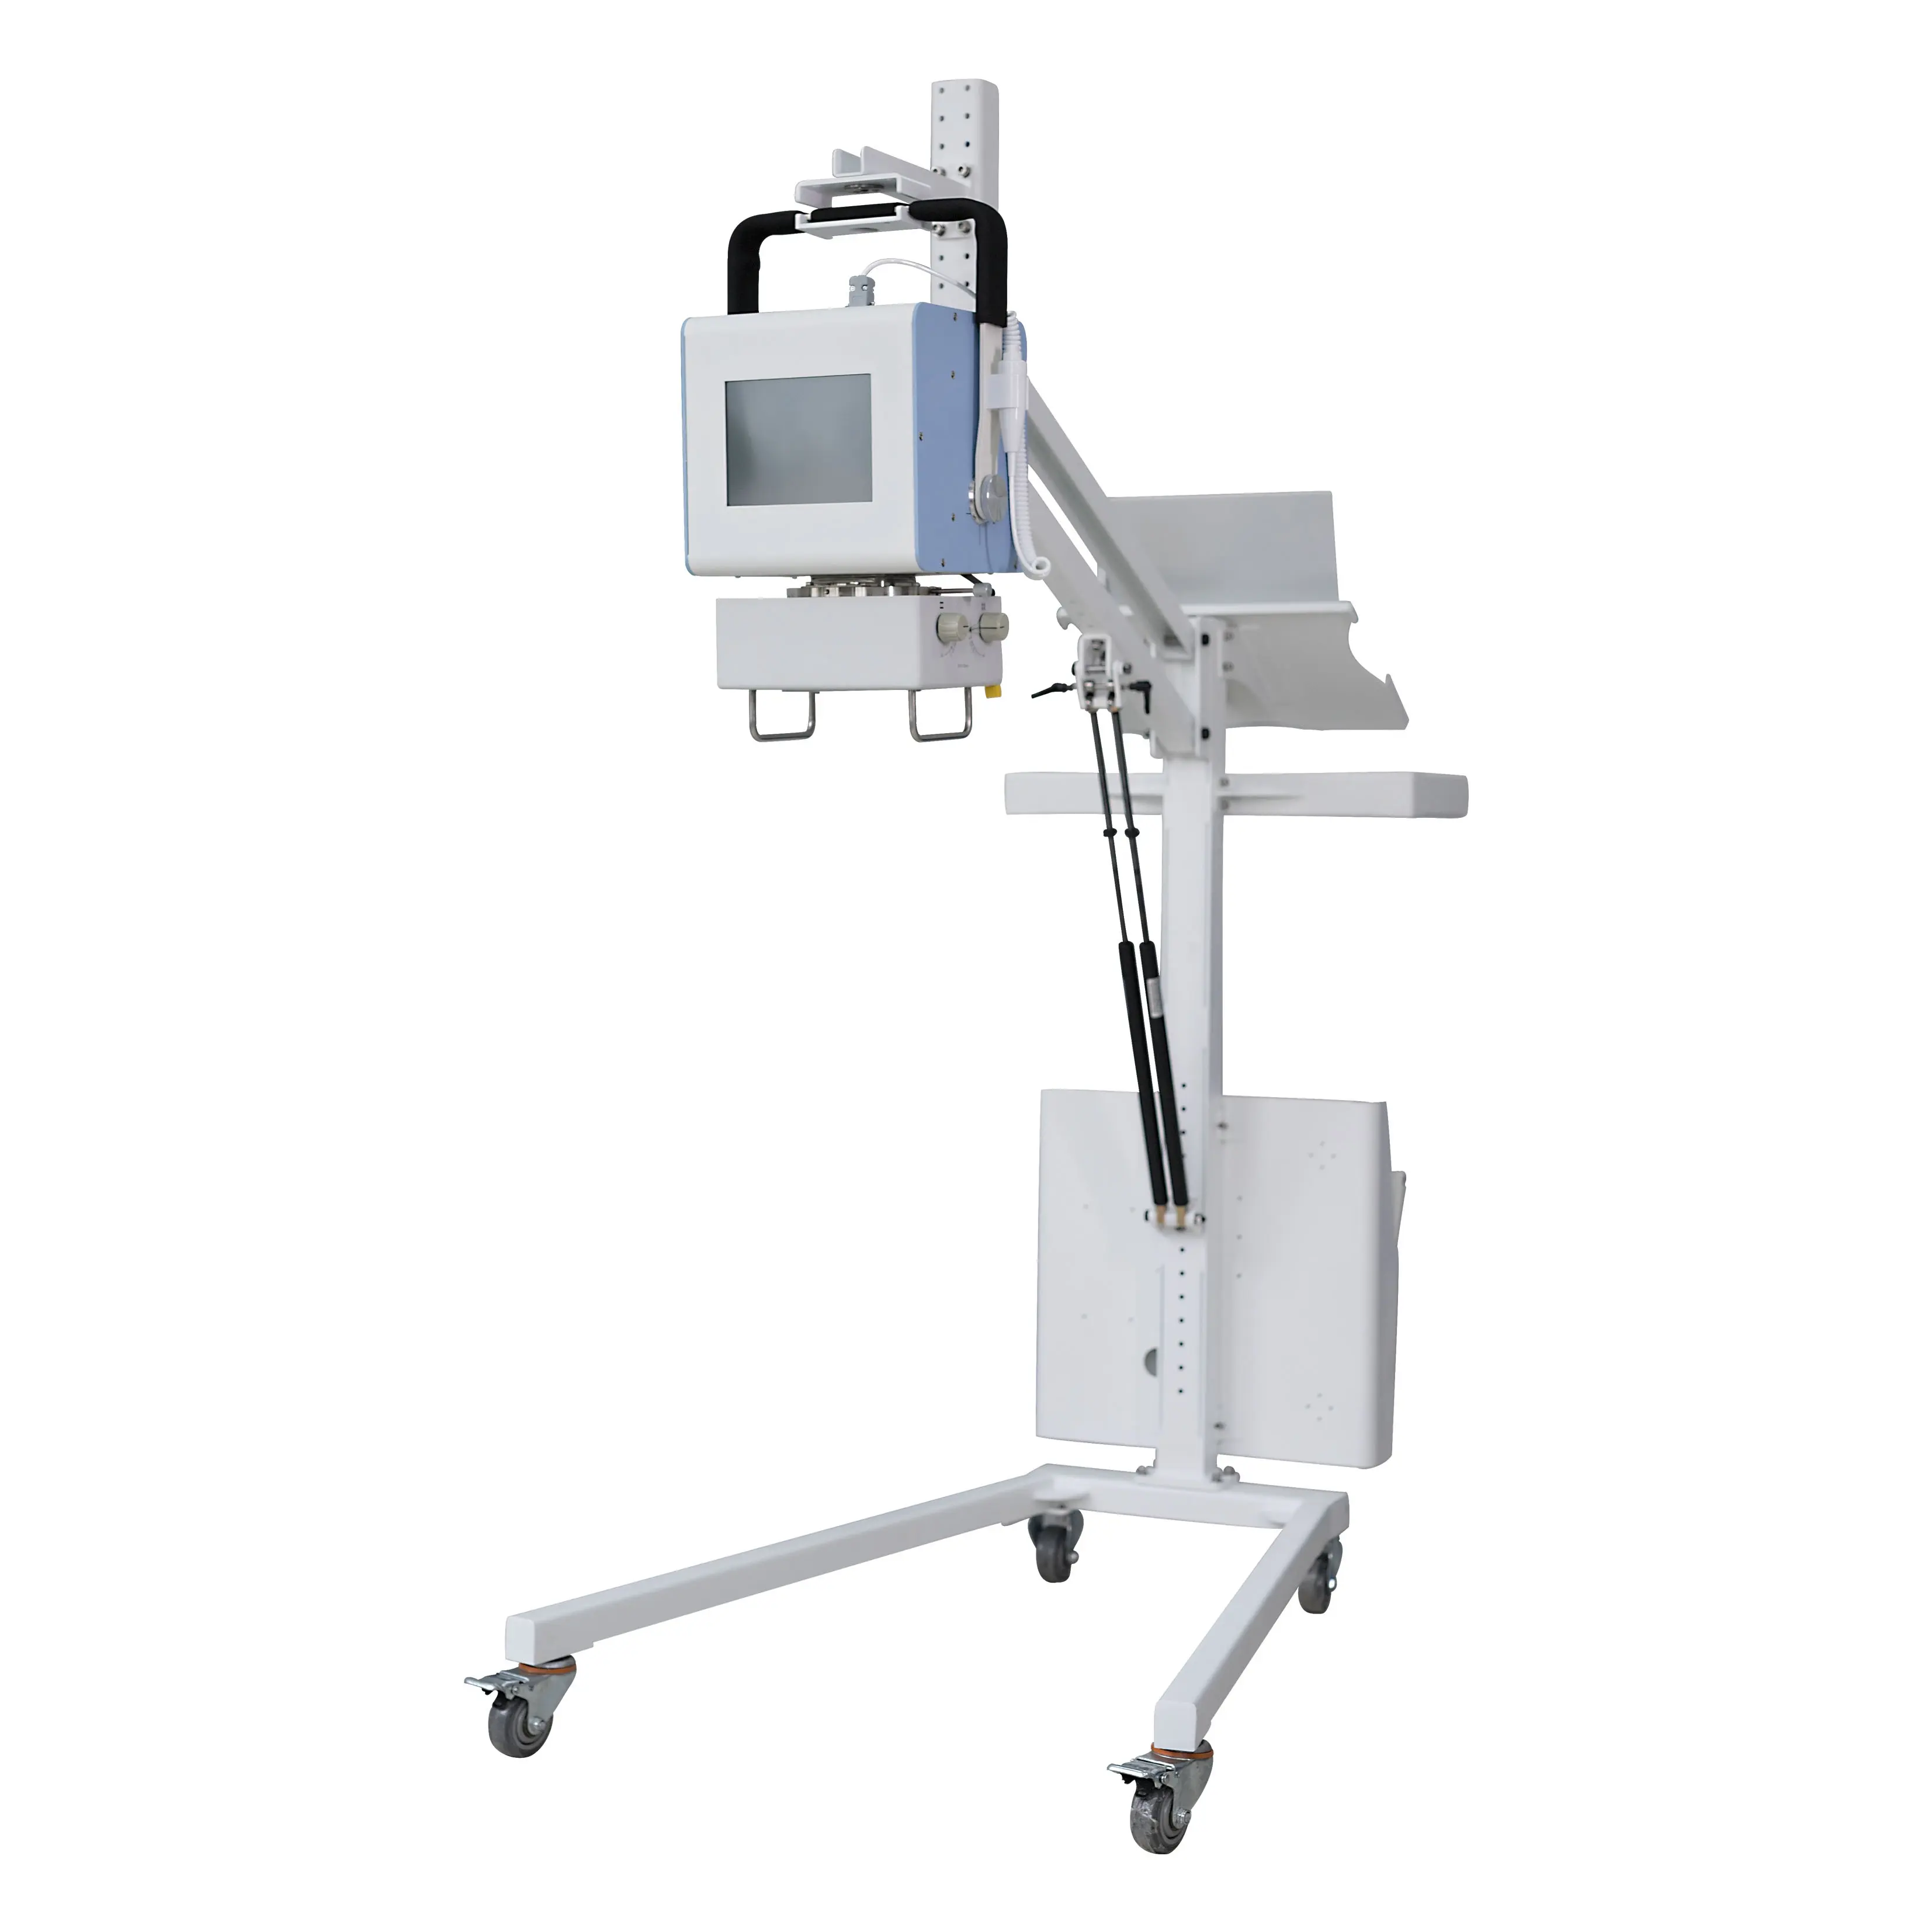 IN-D06 ICEN 4KW high frequency hospital x ray machine